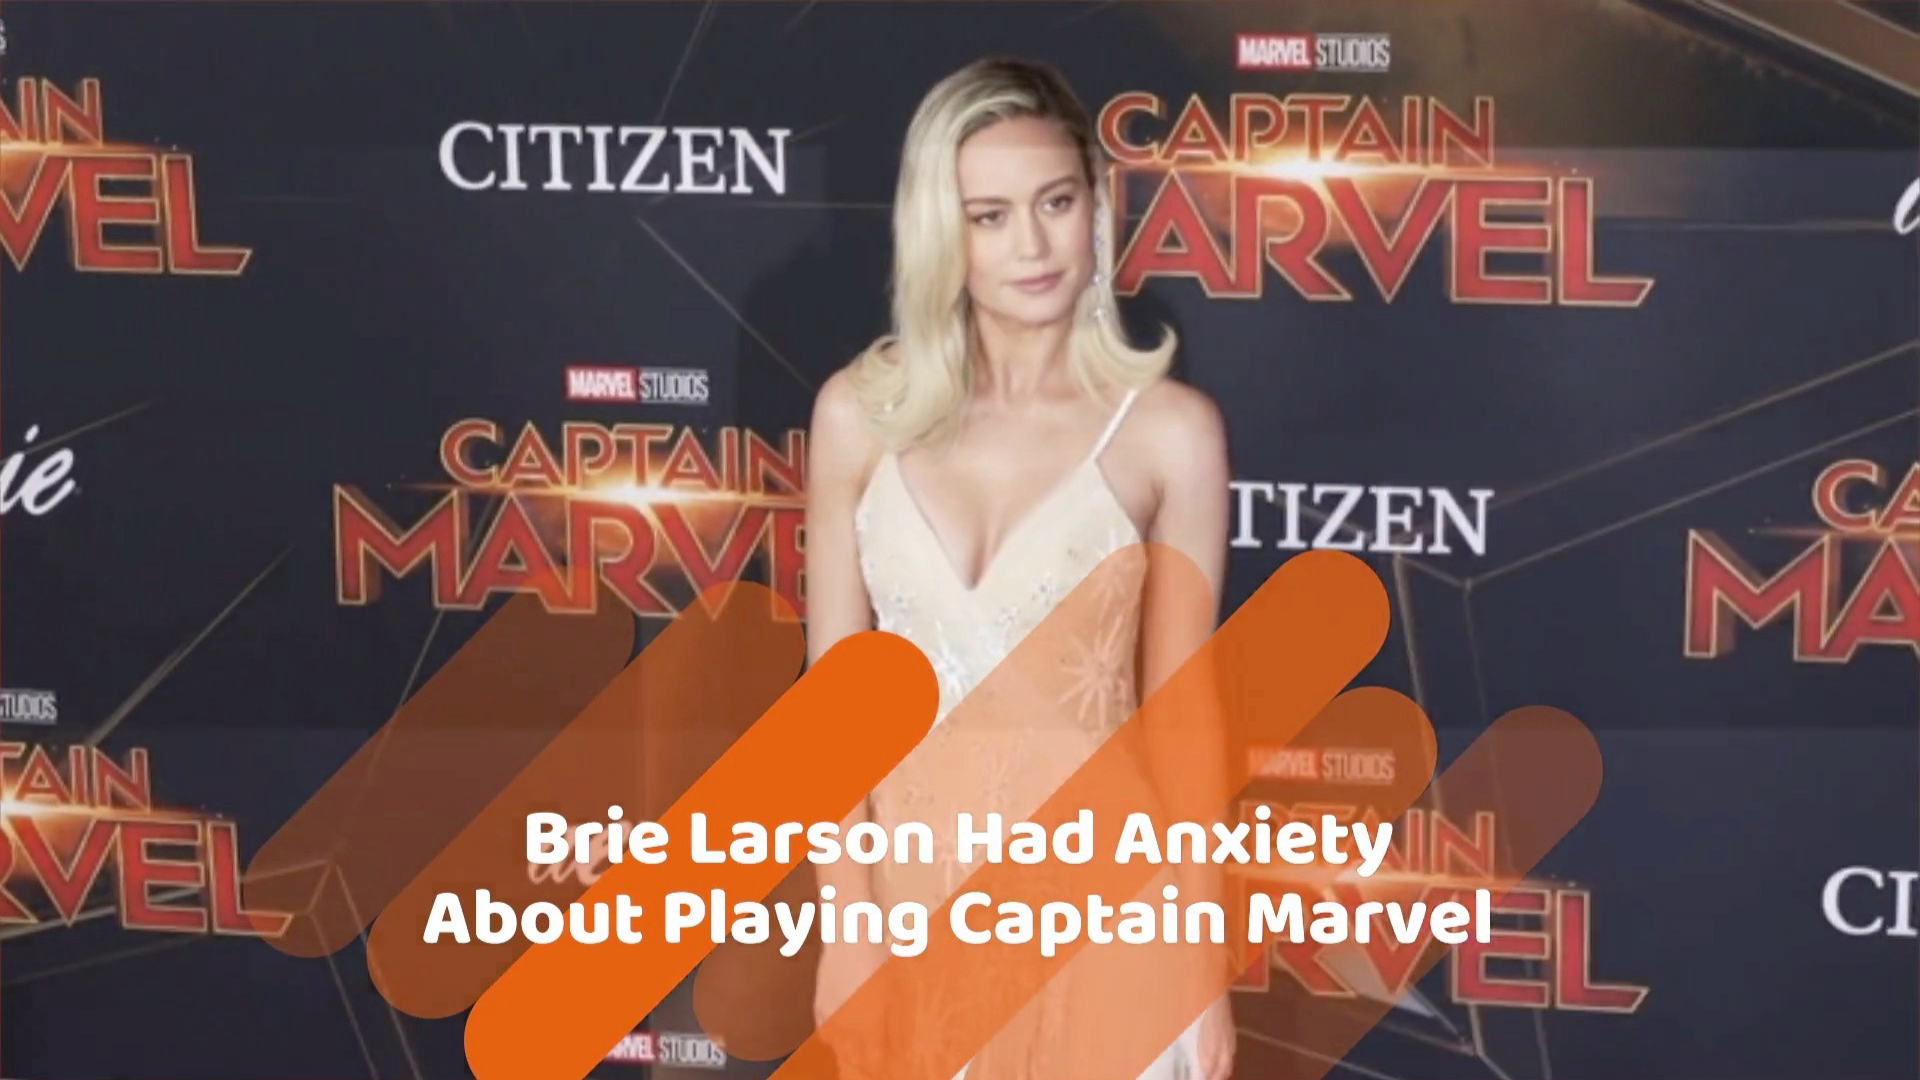 Brie Larson Gets Anxiety